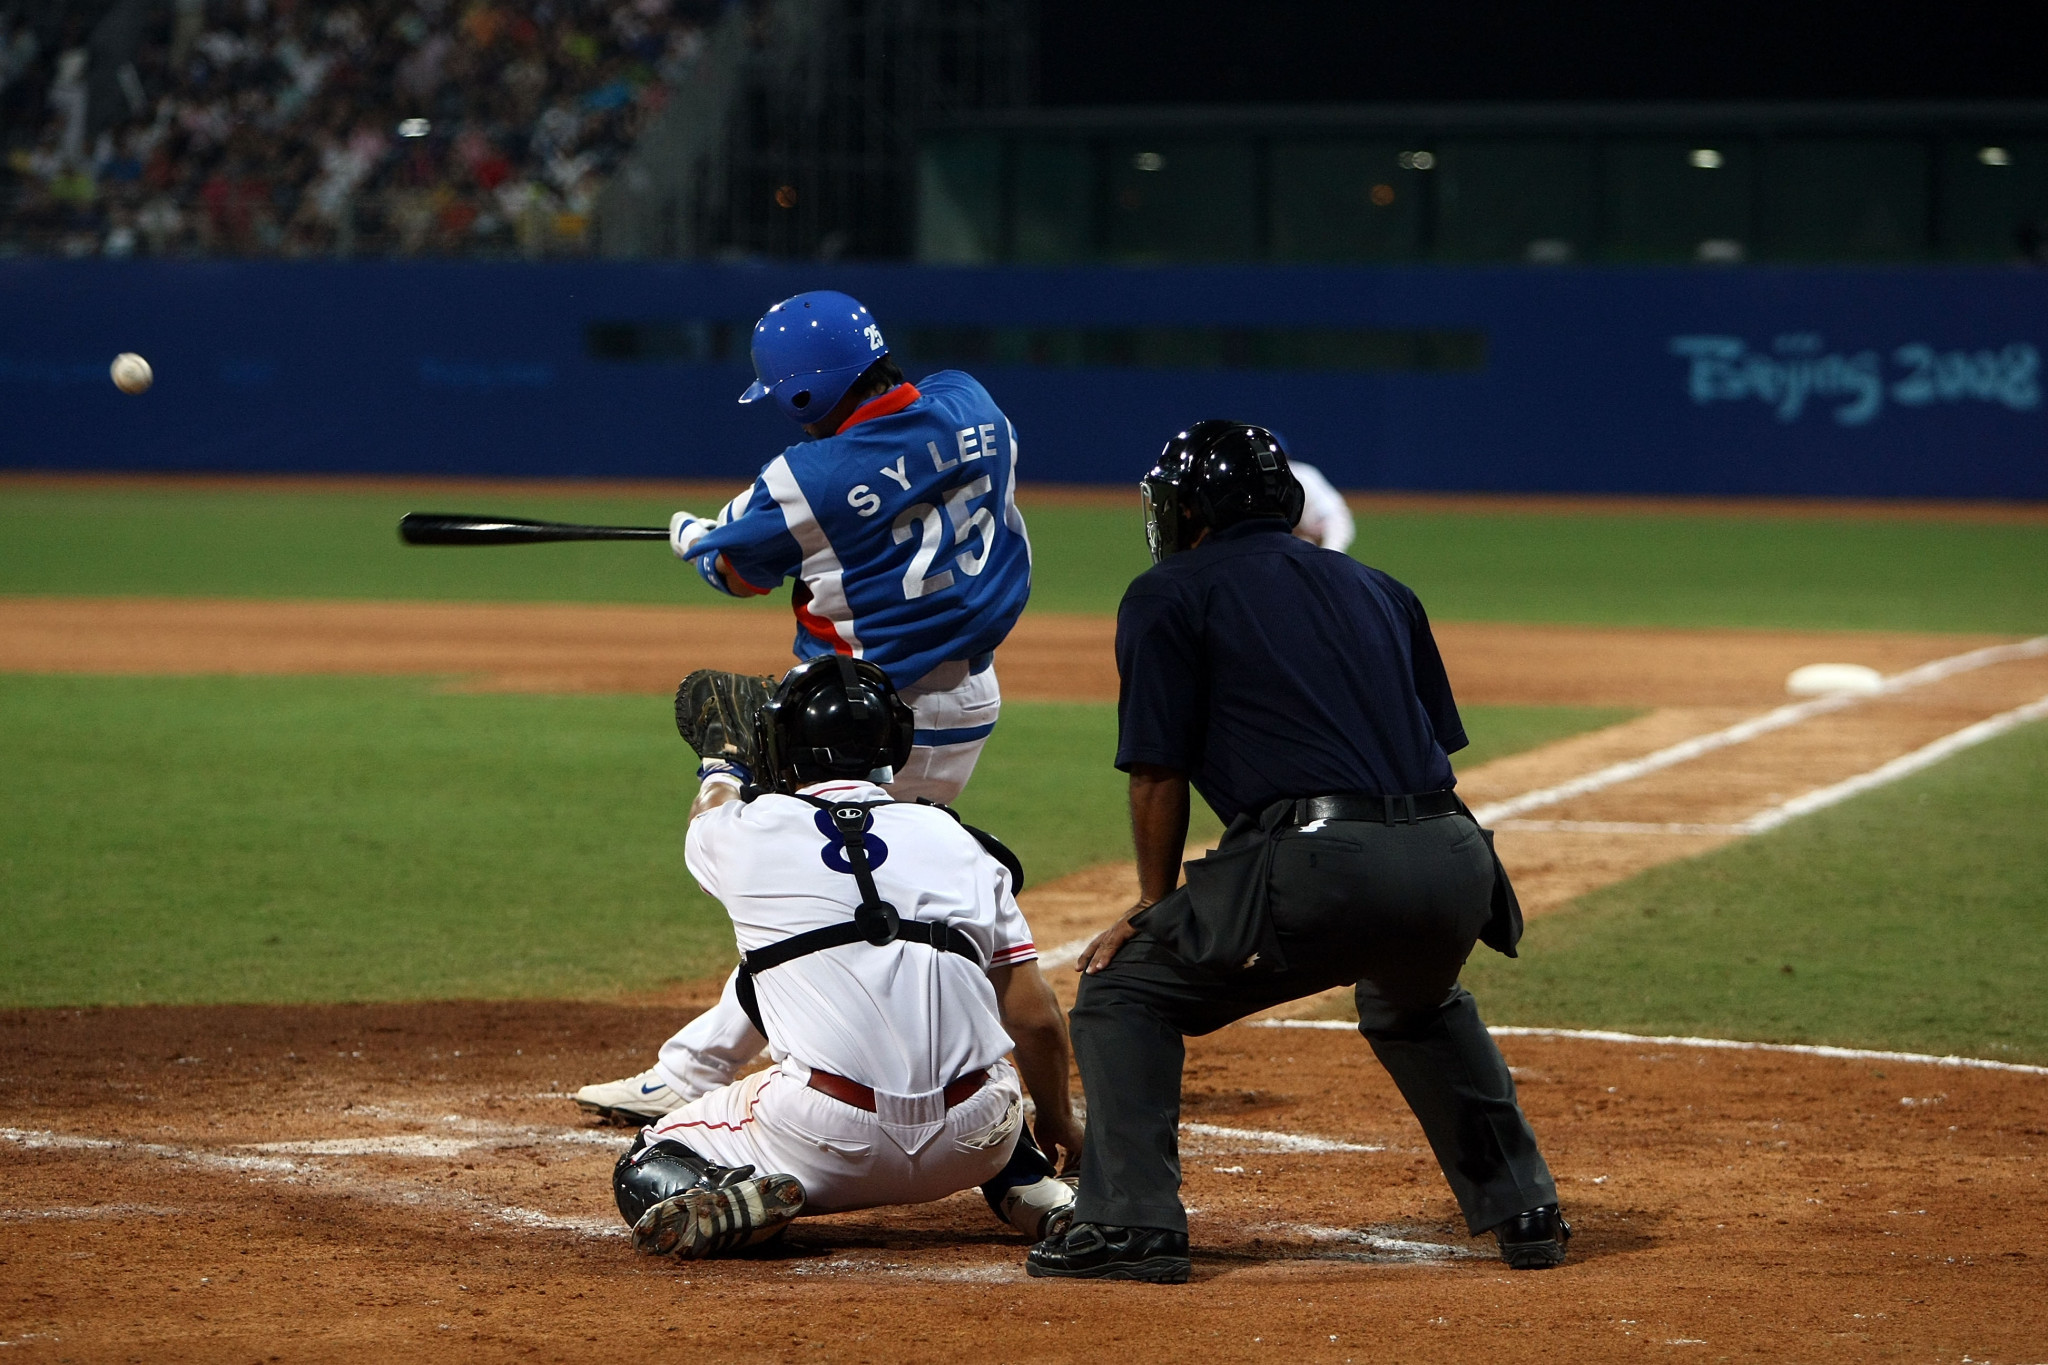 Baseball, pictured, and softball are making their Olympic comeback at Tokyo 2020 following their removal from the programme after Beijing 2008 ©Getty Images